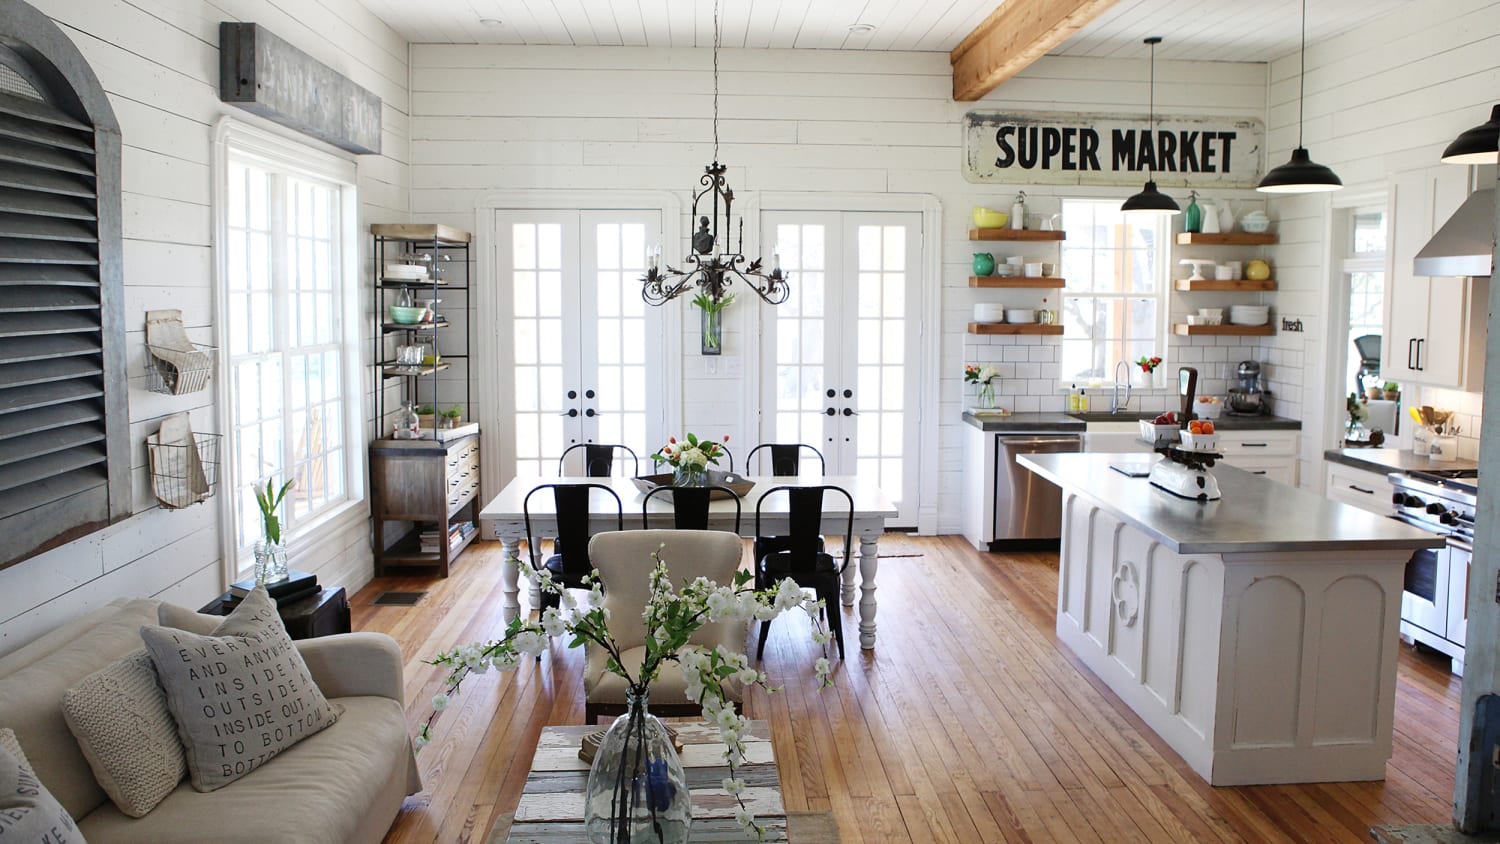 Chip And Joanna Gaines Fixer Upper Home Tour In Waco Texas within Home Design Waco Texas